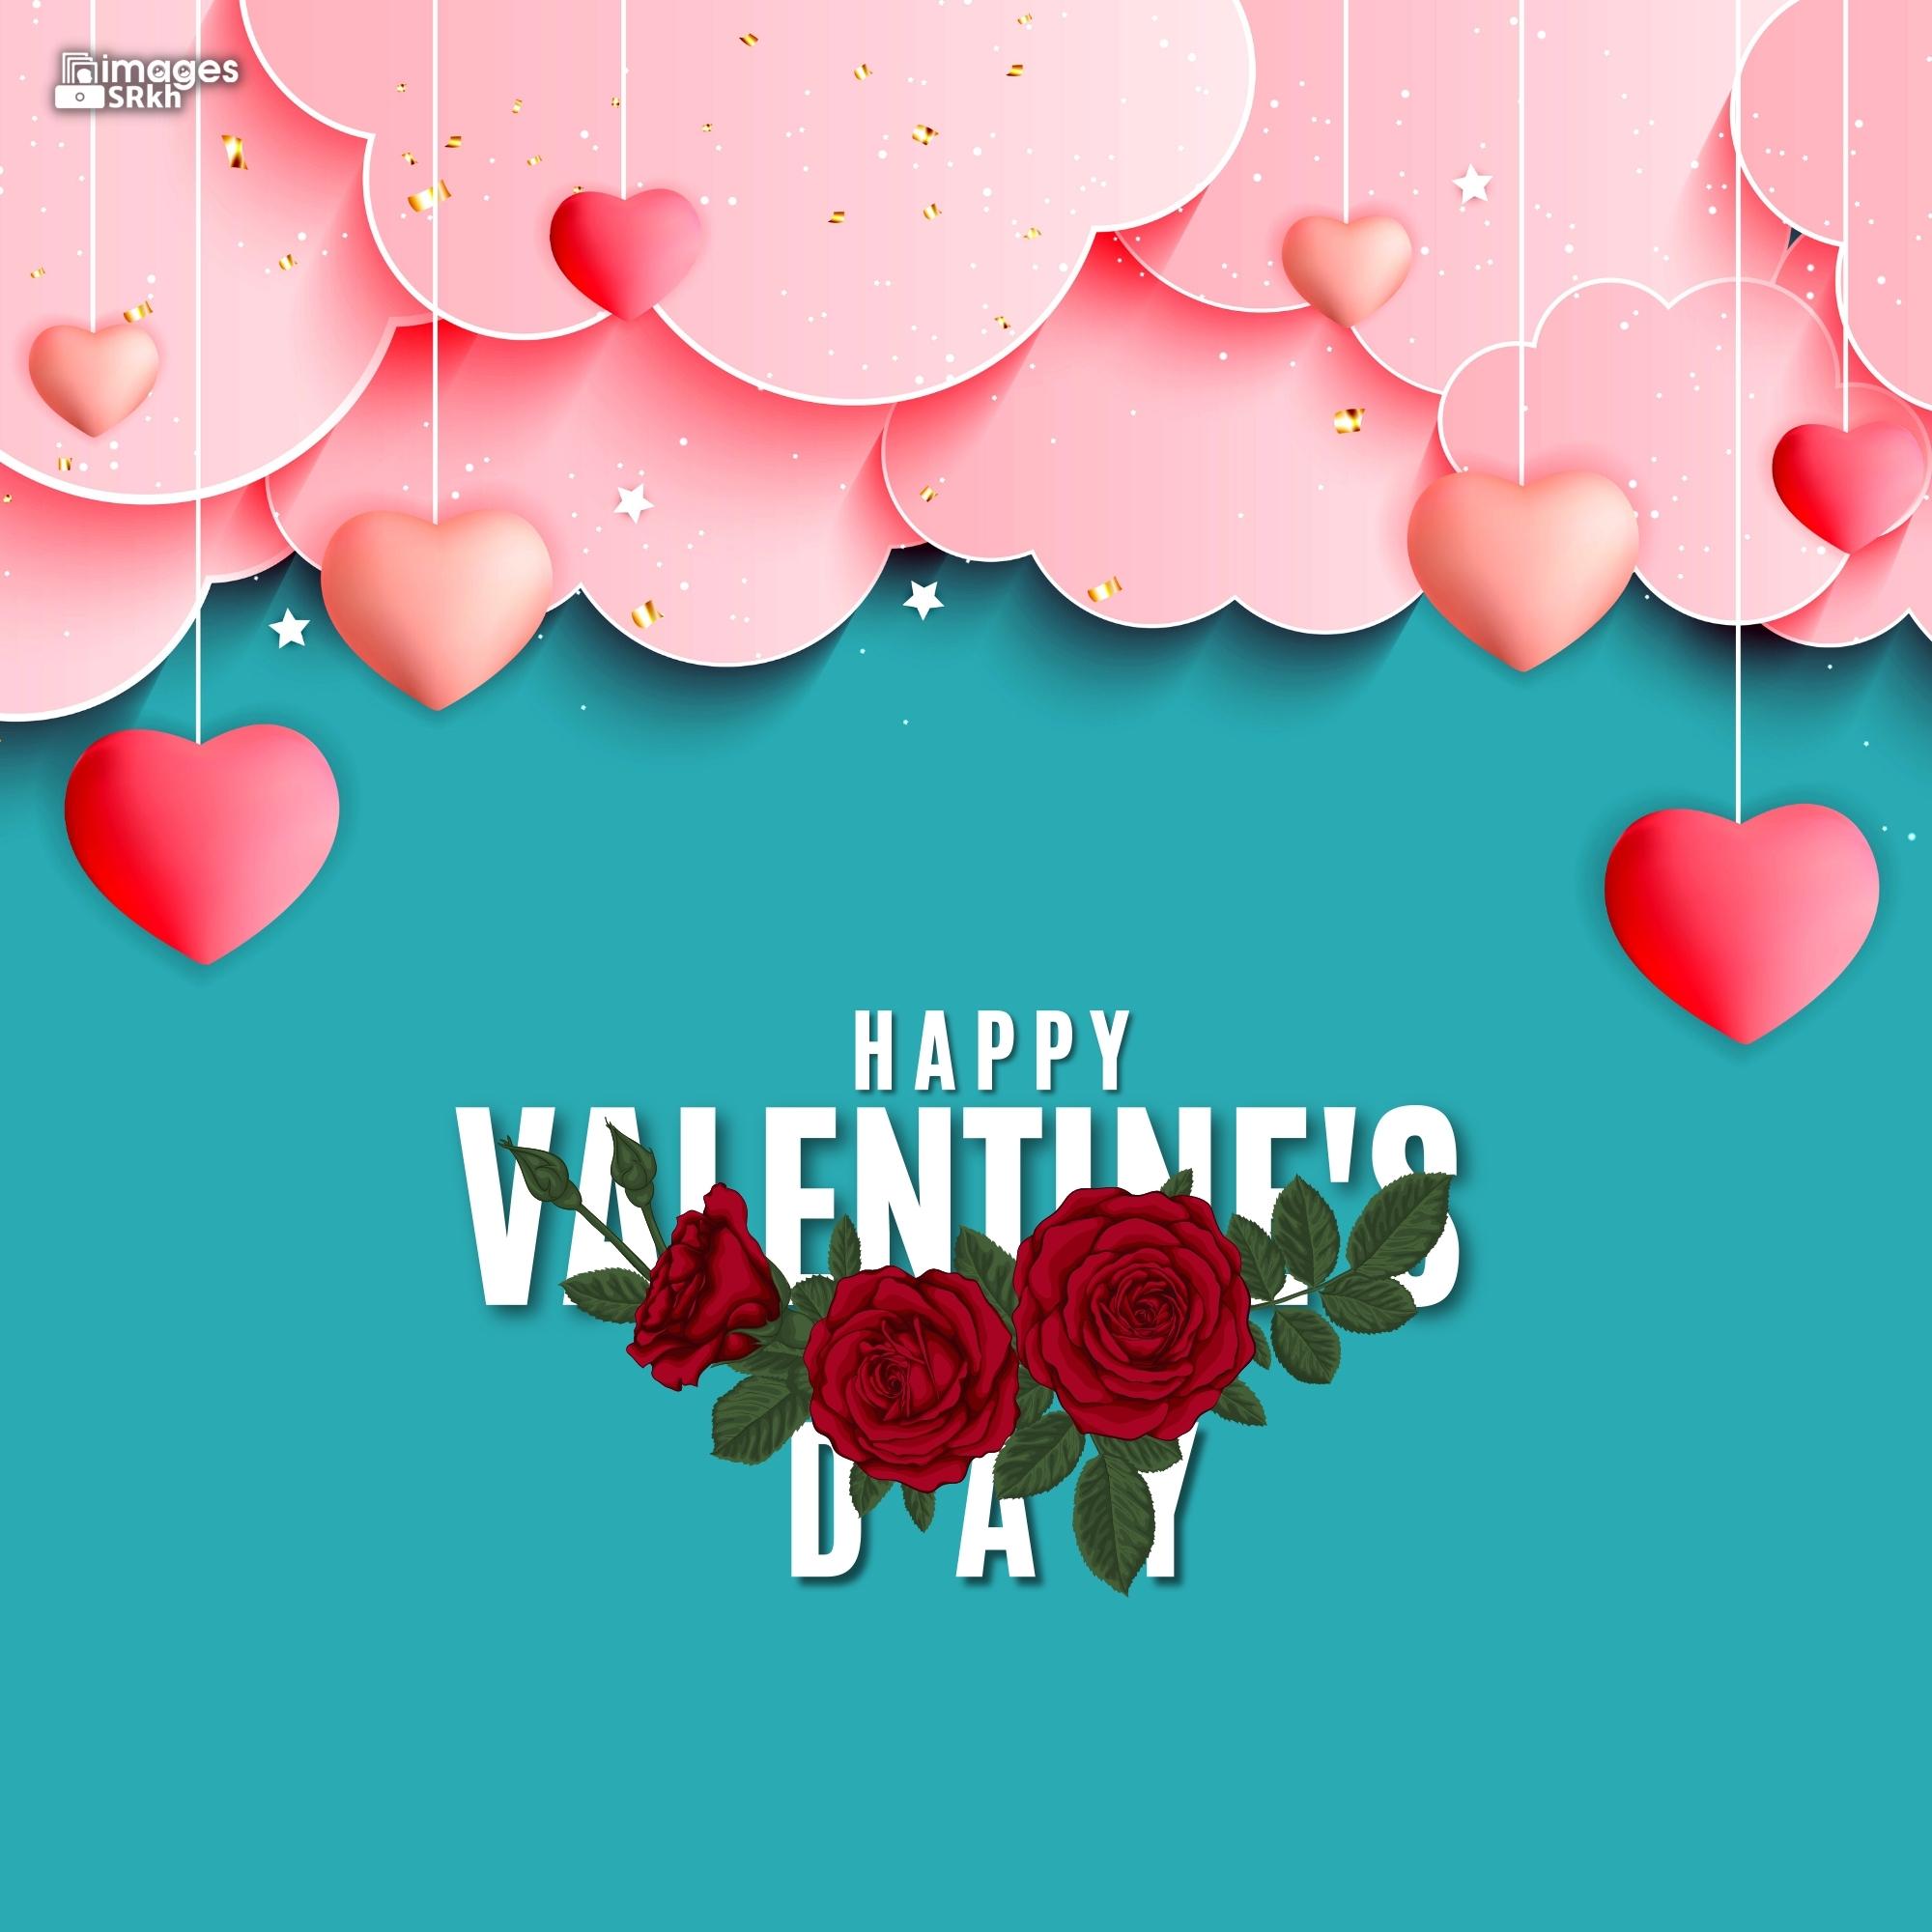 Happy Valentines Day | 542 | PREMIUM IMAGES | Wishes for Love